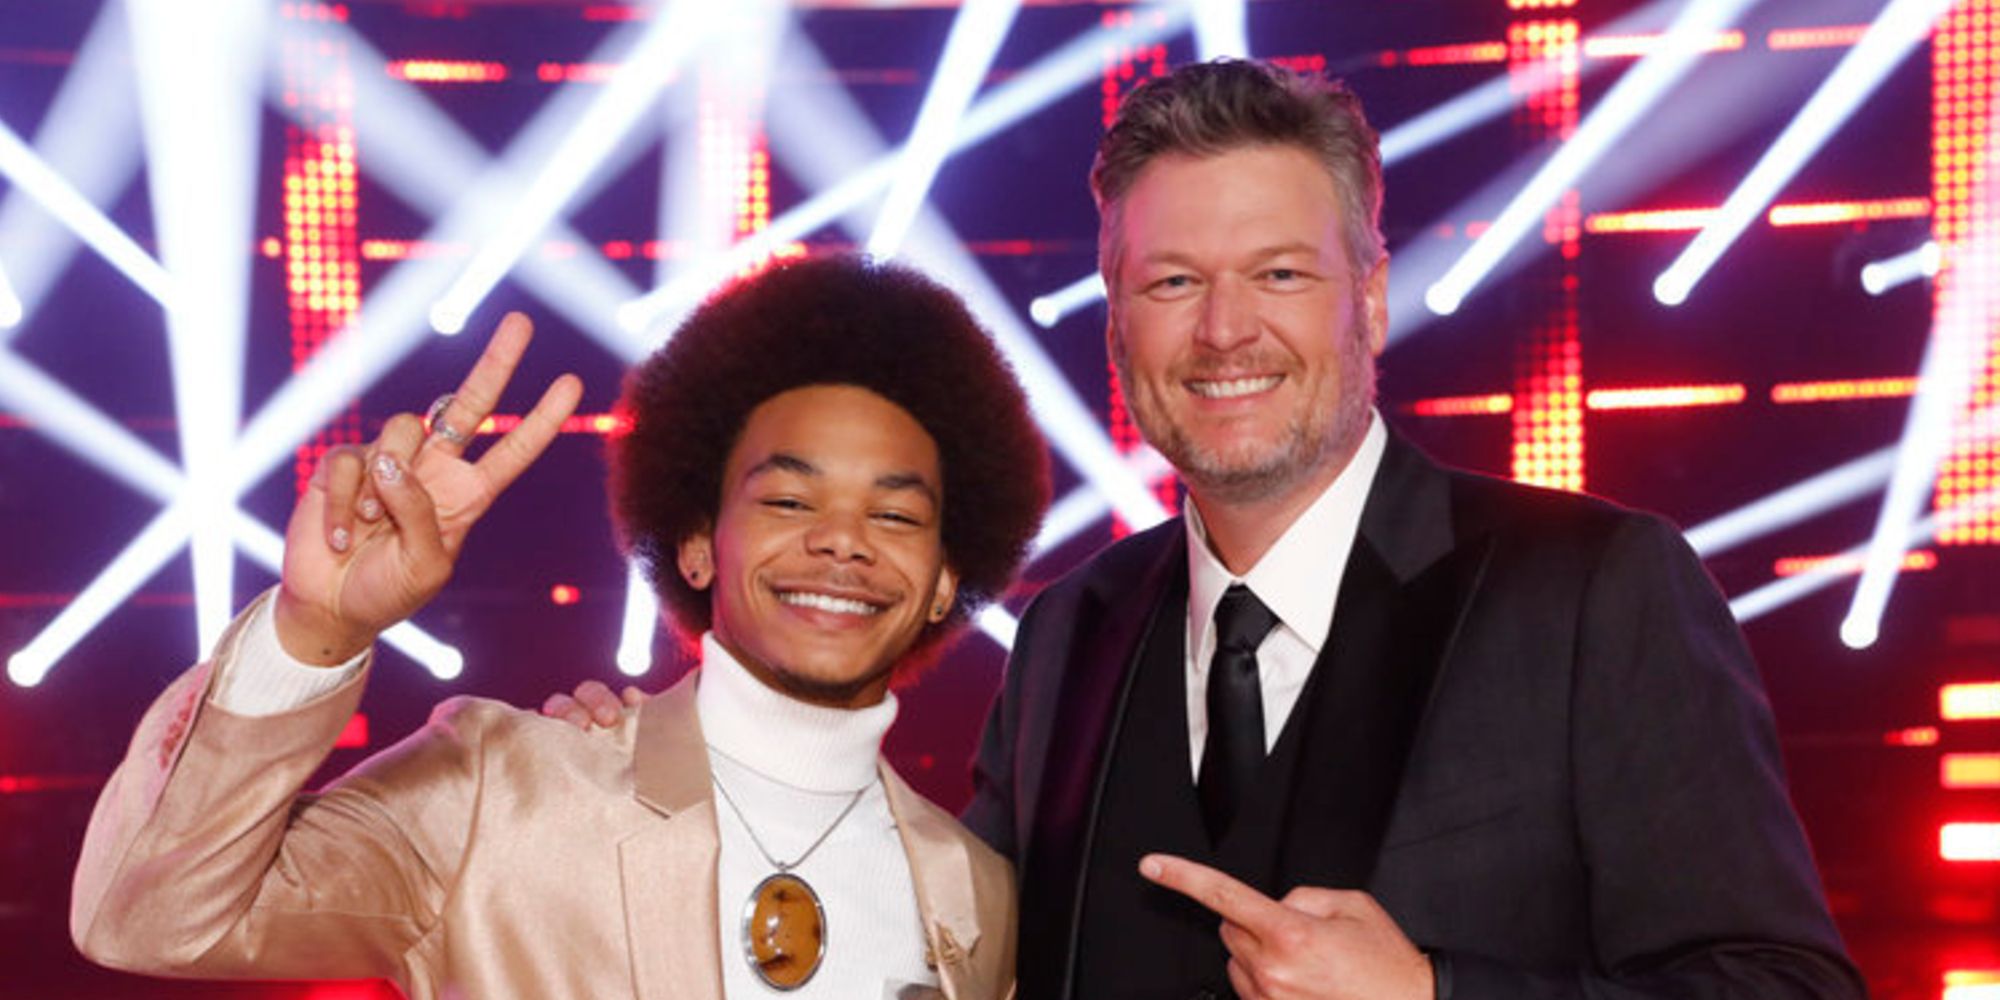 The Voice: Blake Shelton Has Now Coached 8 Winners, Setting New Record